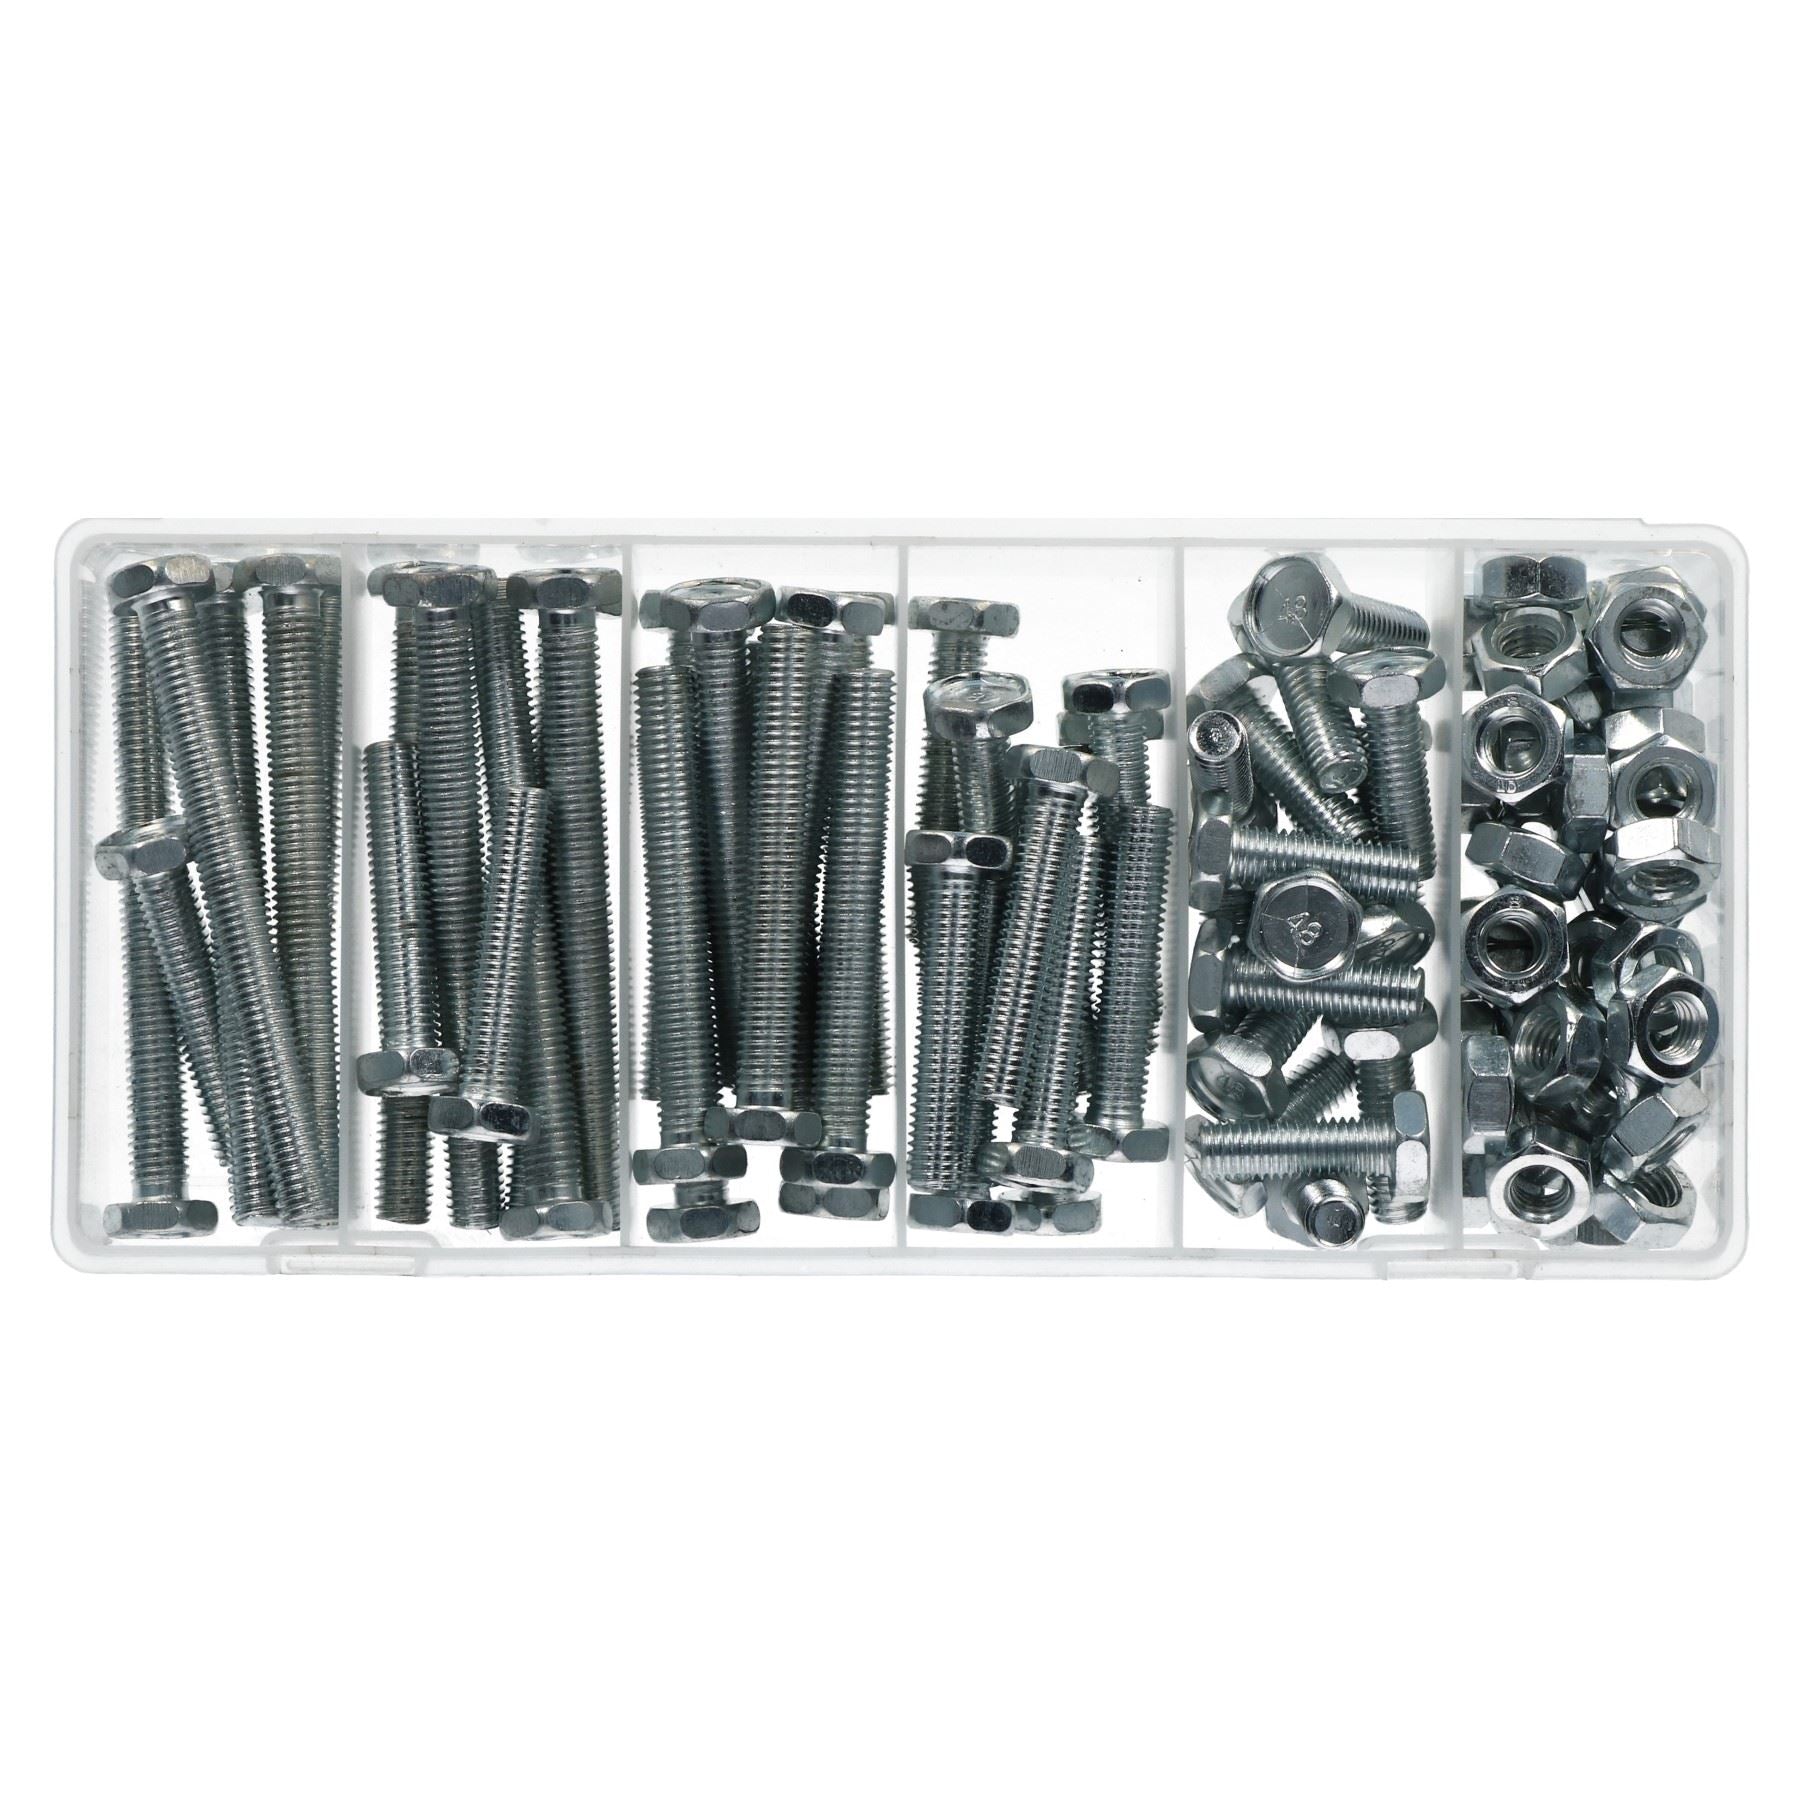 100pc Nut And Bolt Set 10mm Thread (M10 x 1.5) Various Length 30-100mm Bolts